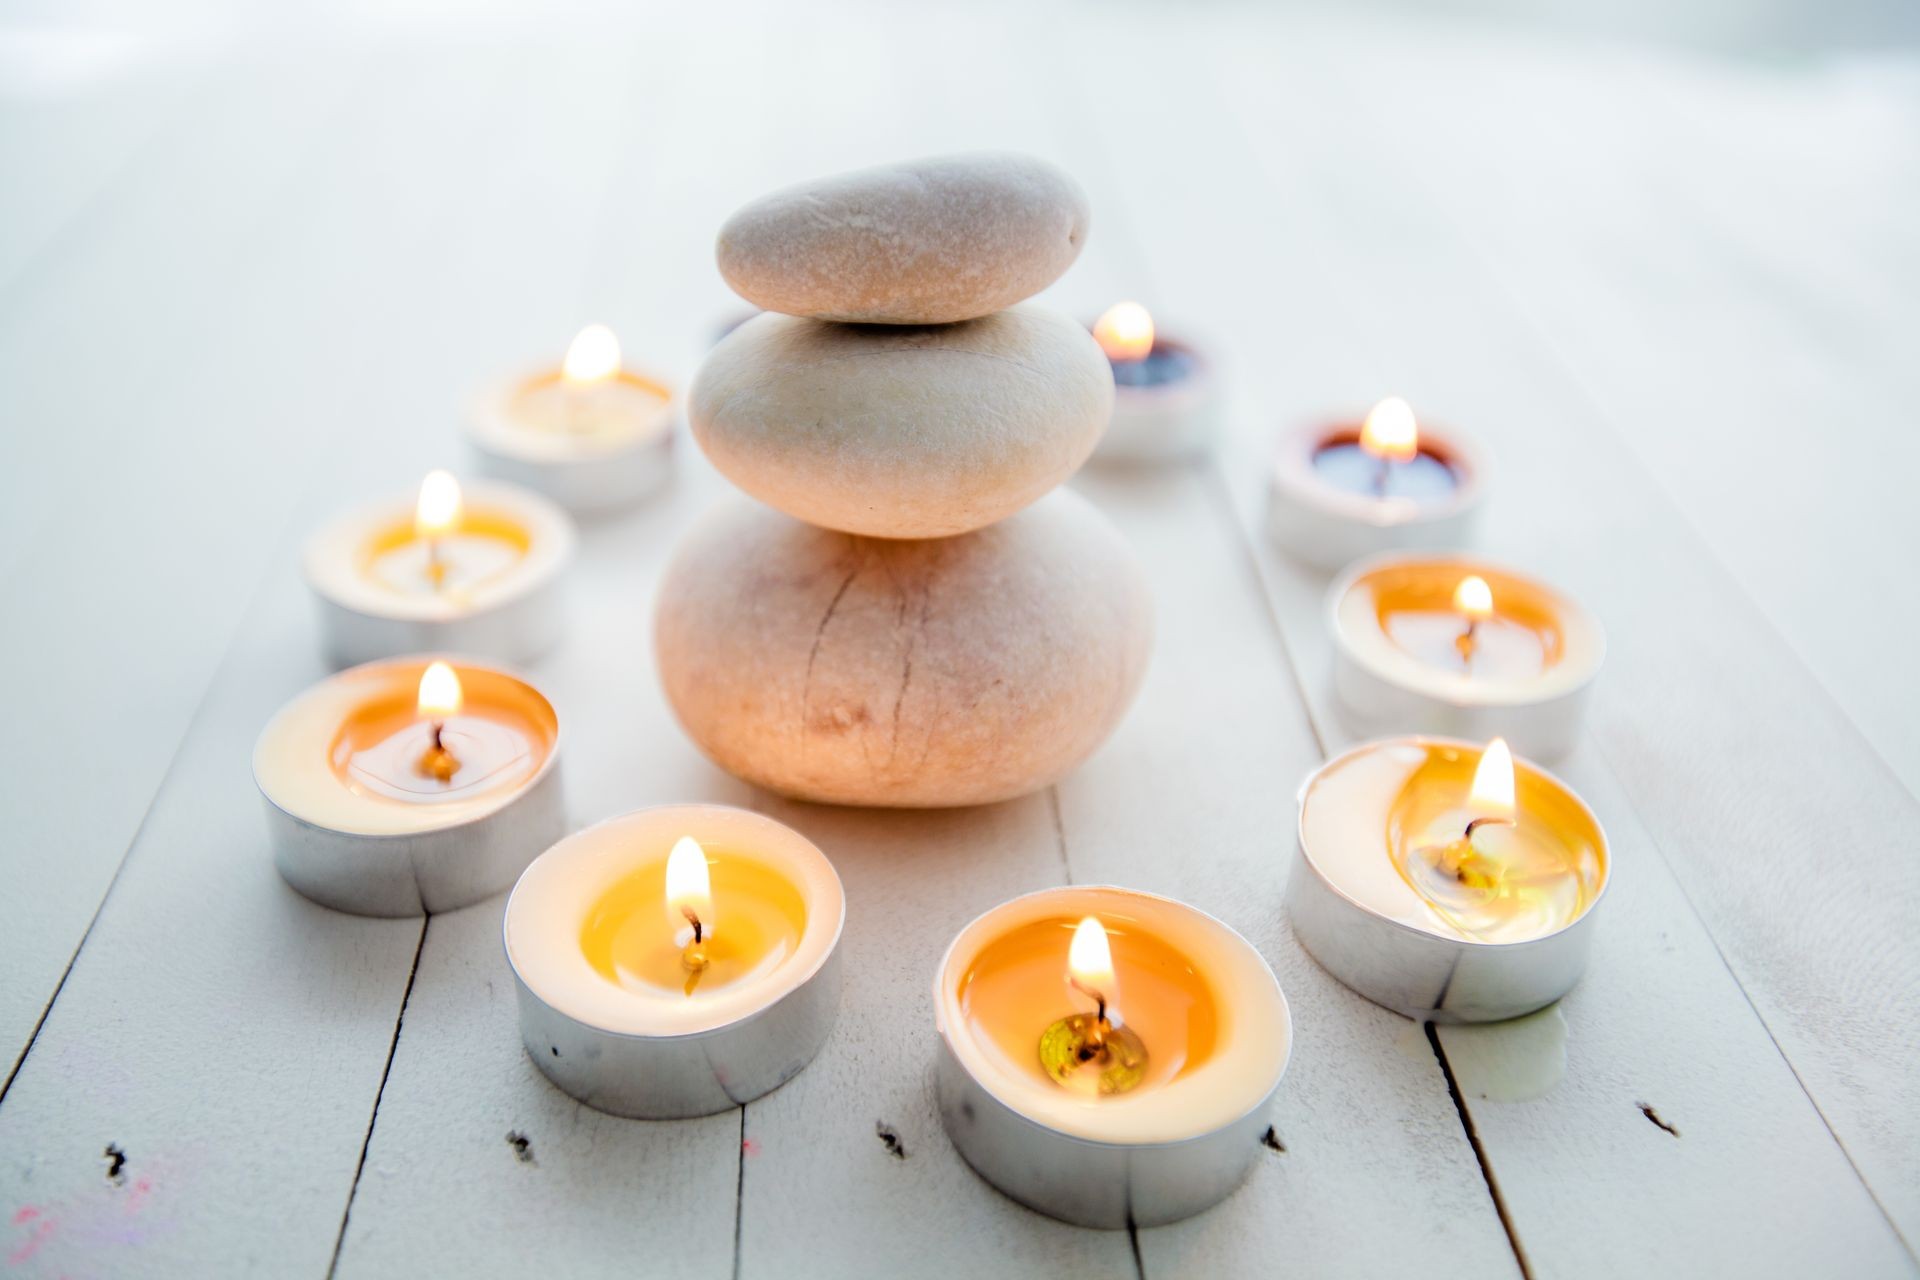 Zen Meditation Harmony, Spa Lifestyle, balanced stack of stones with aromatic candles on wooden white background